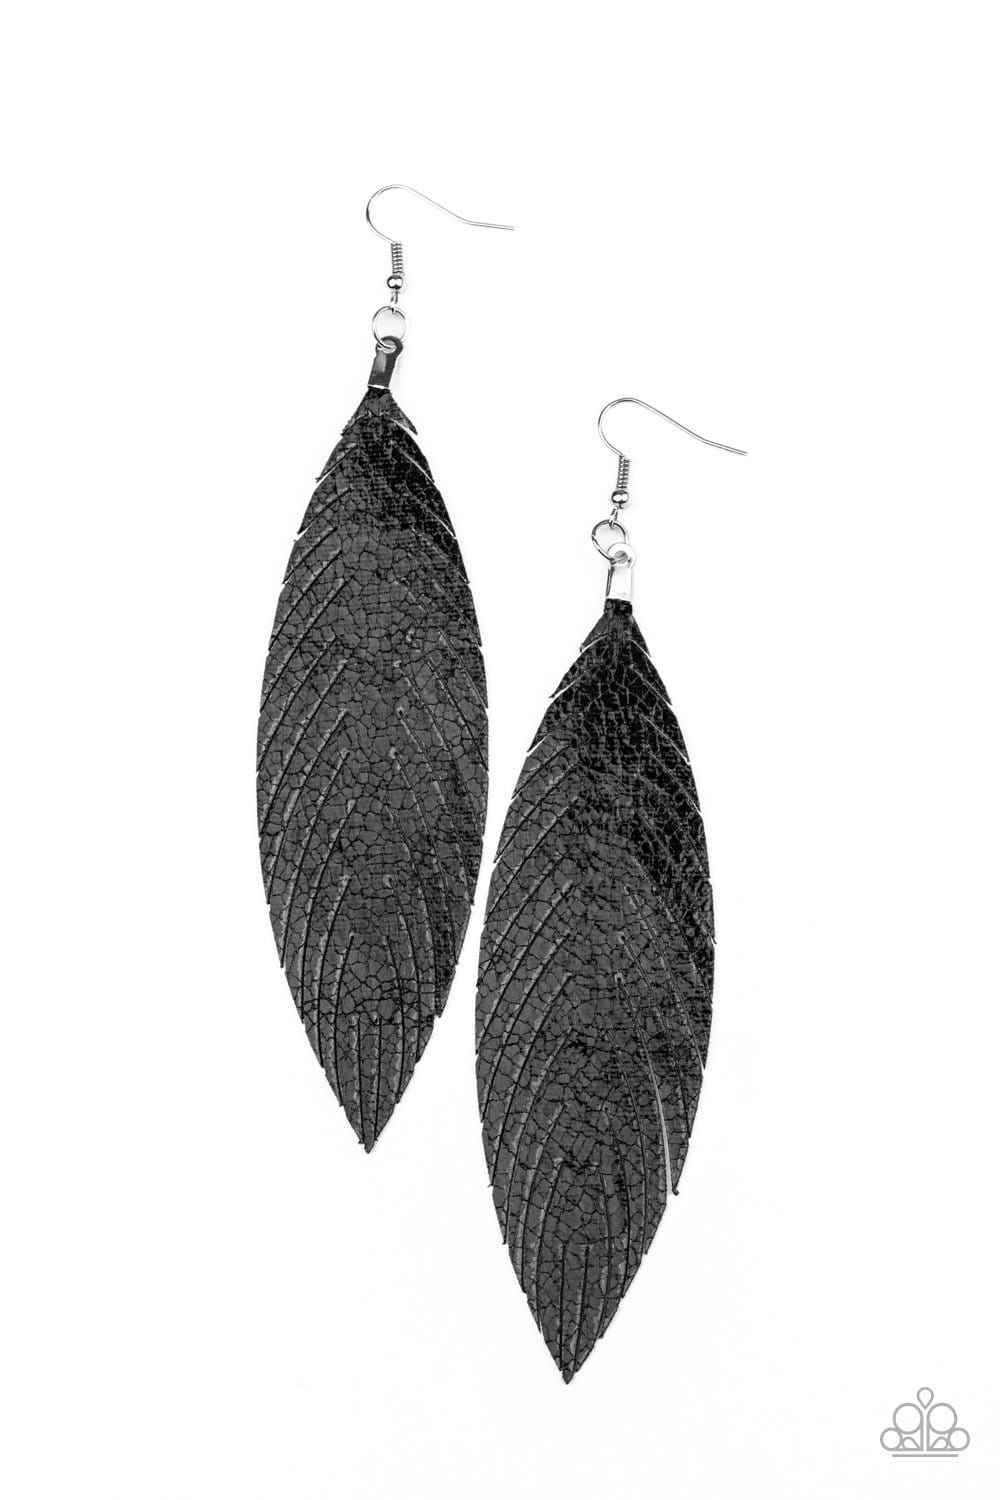 Feather Fantasy - Black Leather Feather Earrings - Paparazzi Accessories - GlaMarous Titi Jewels